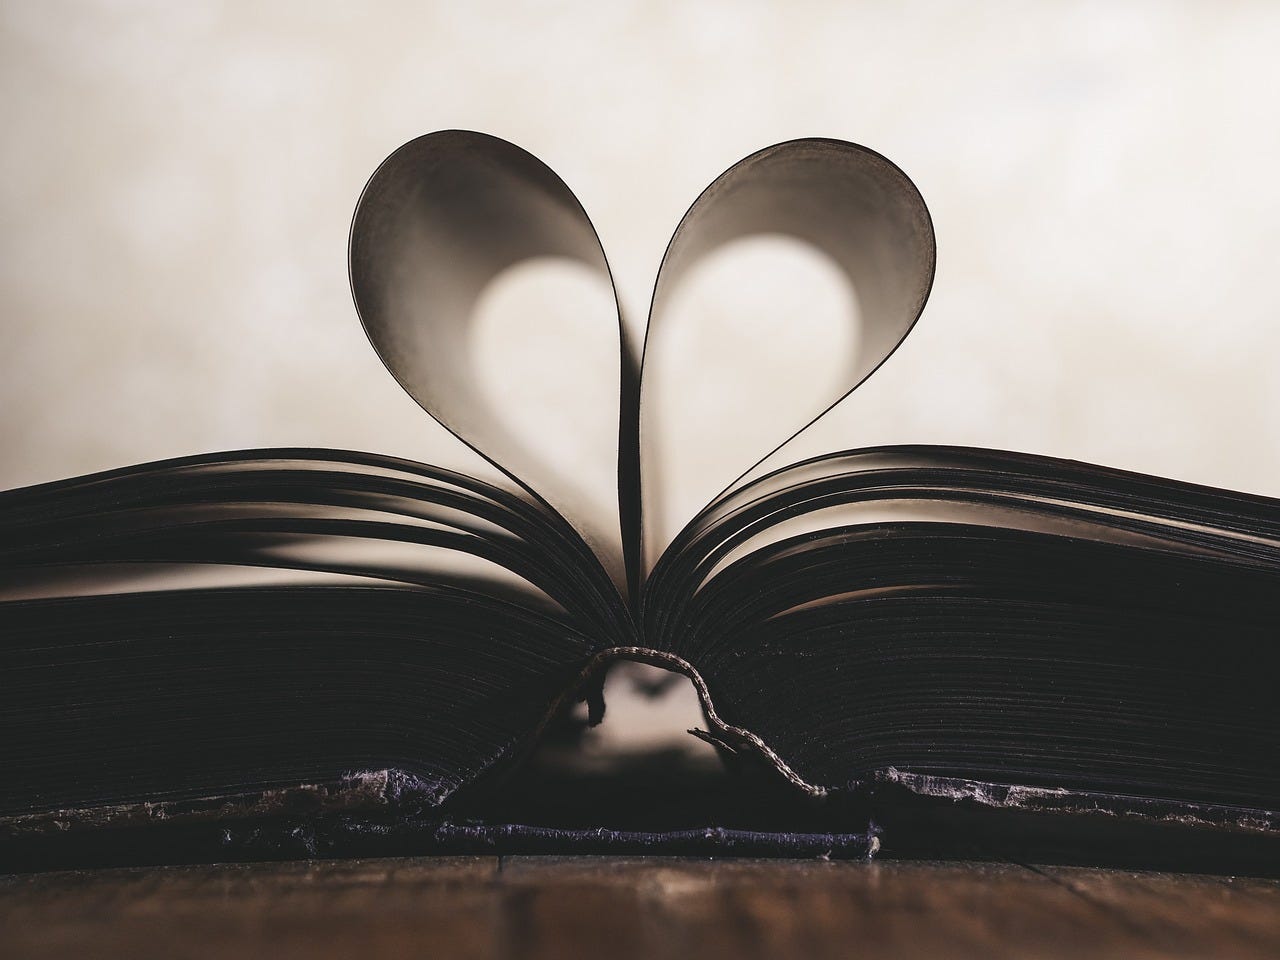 An open book with pages folded into a heart